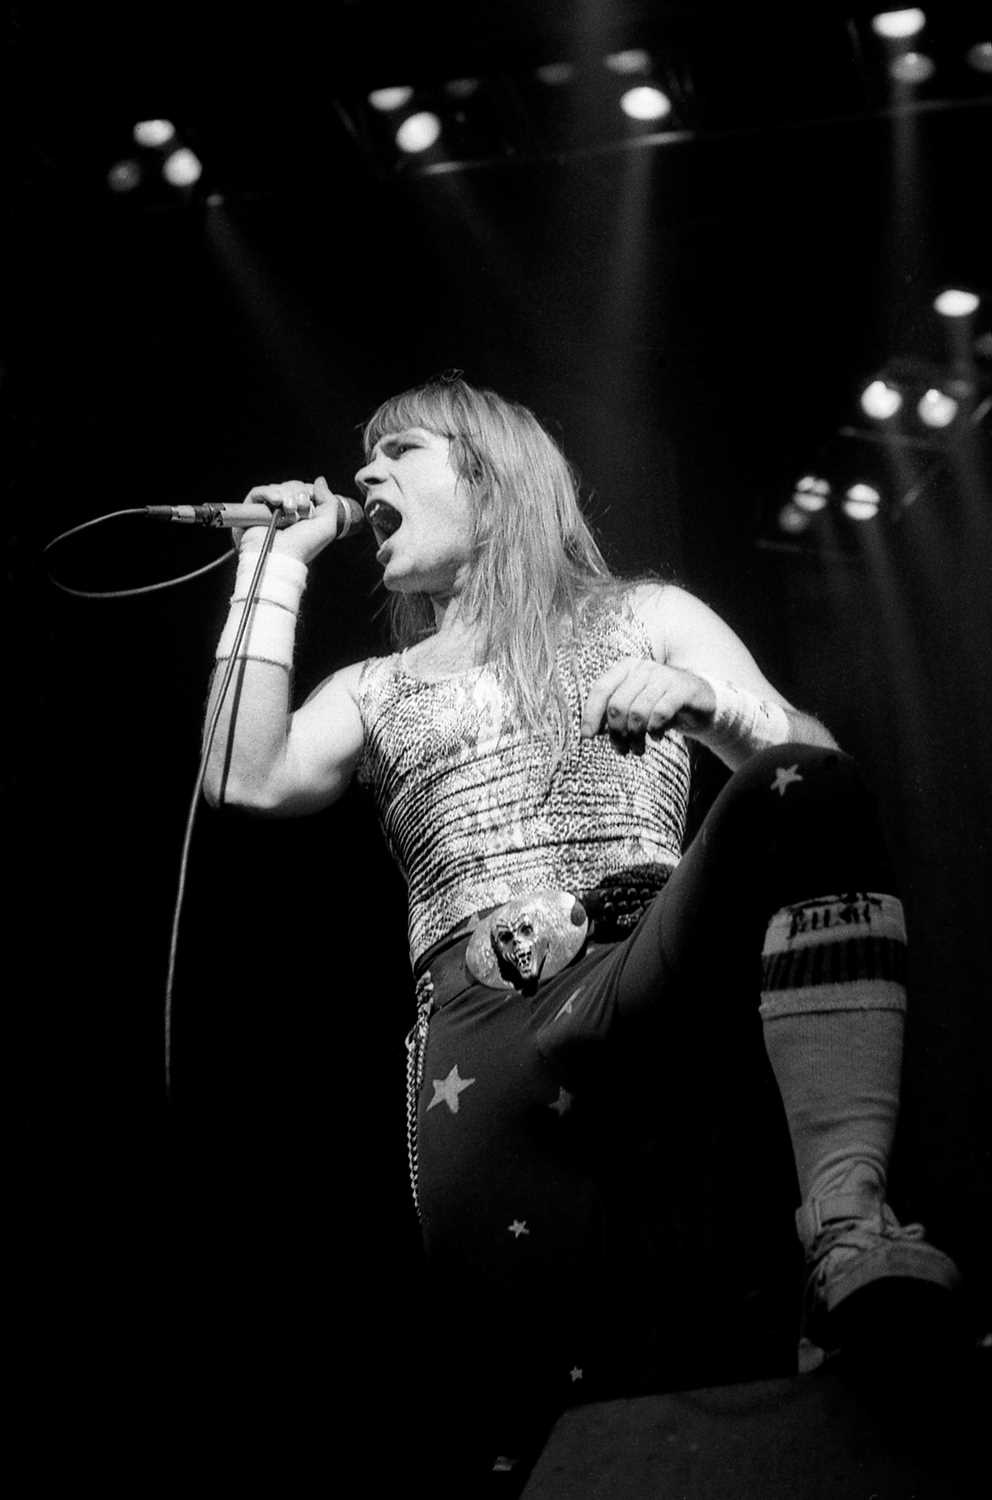 Lot 30 - IRON MAIDEN NEGATIVES - WITH COPYRIGHT